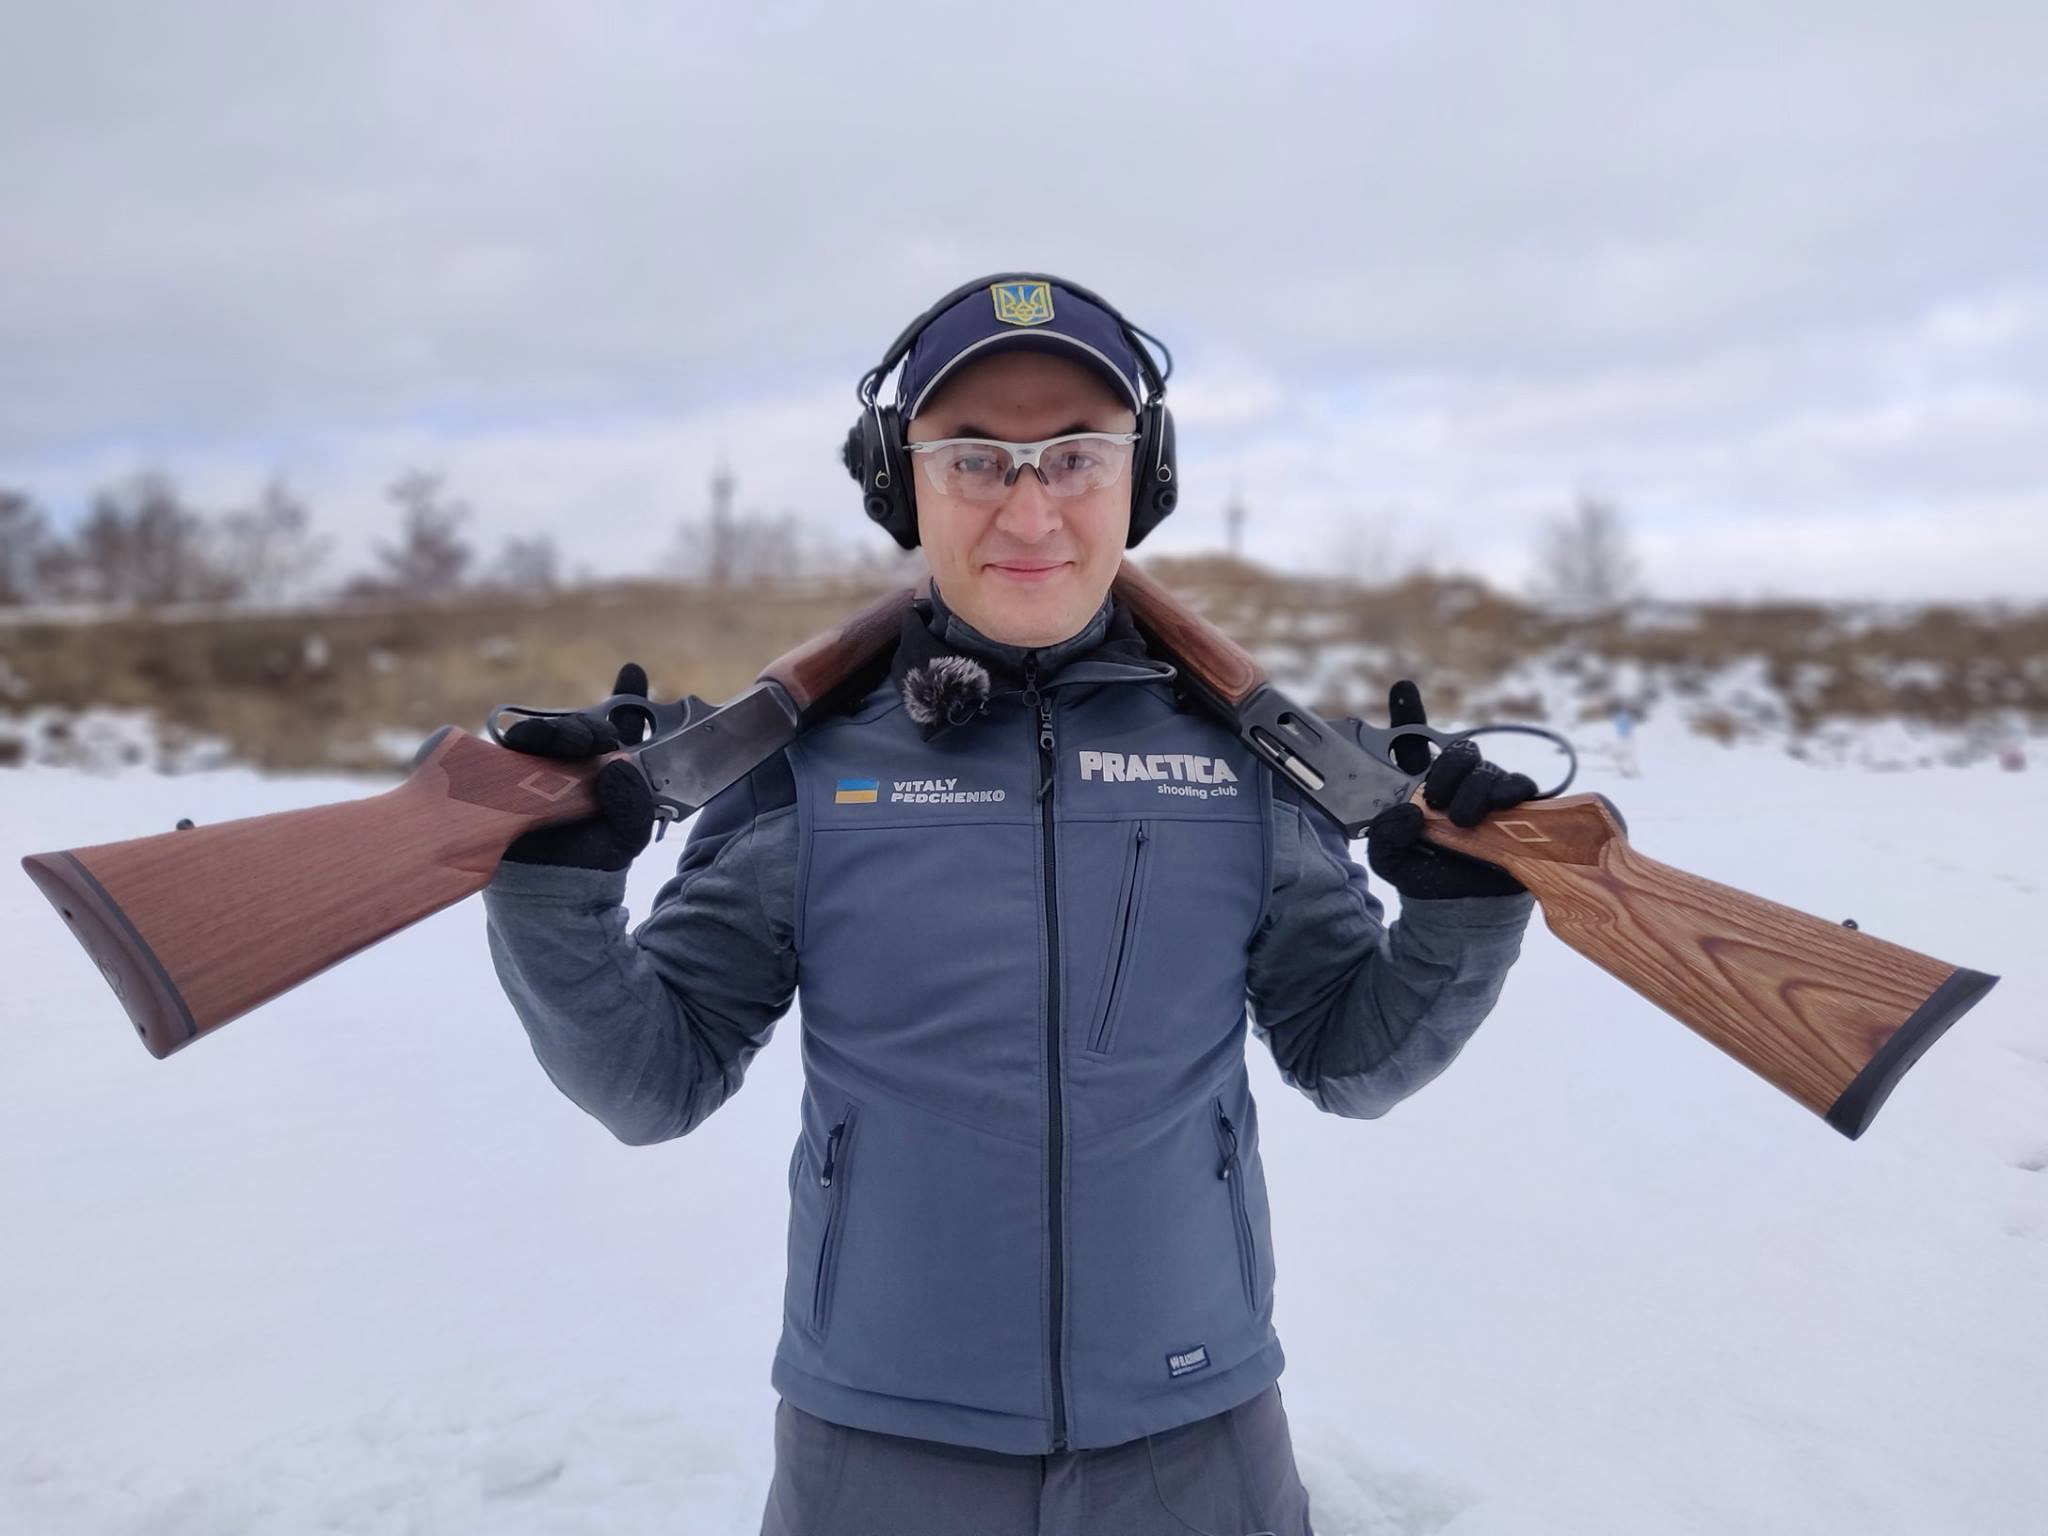 7 Must Have Upgrades for Lever-Action Rifles Marlin Model 336, 1895